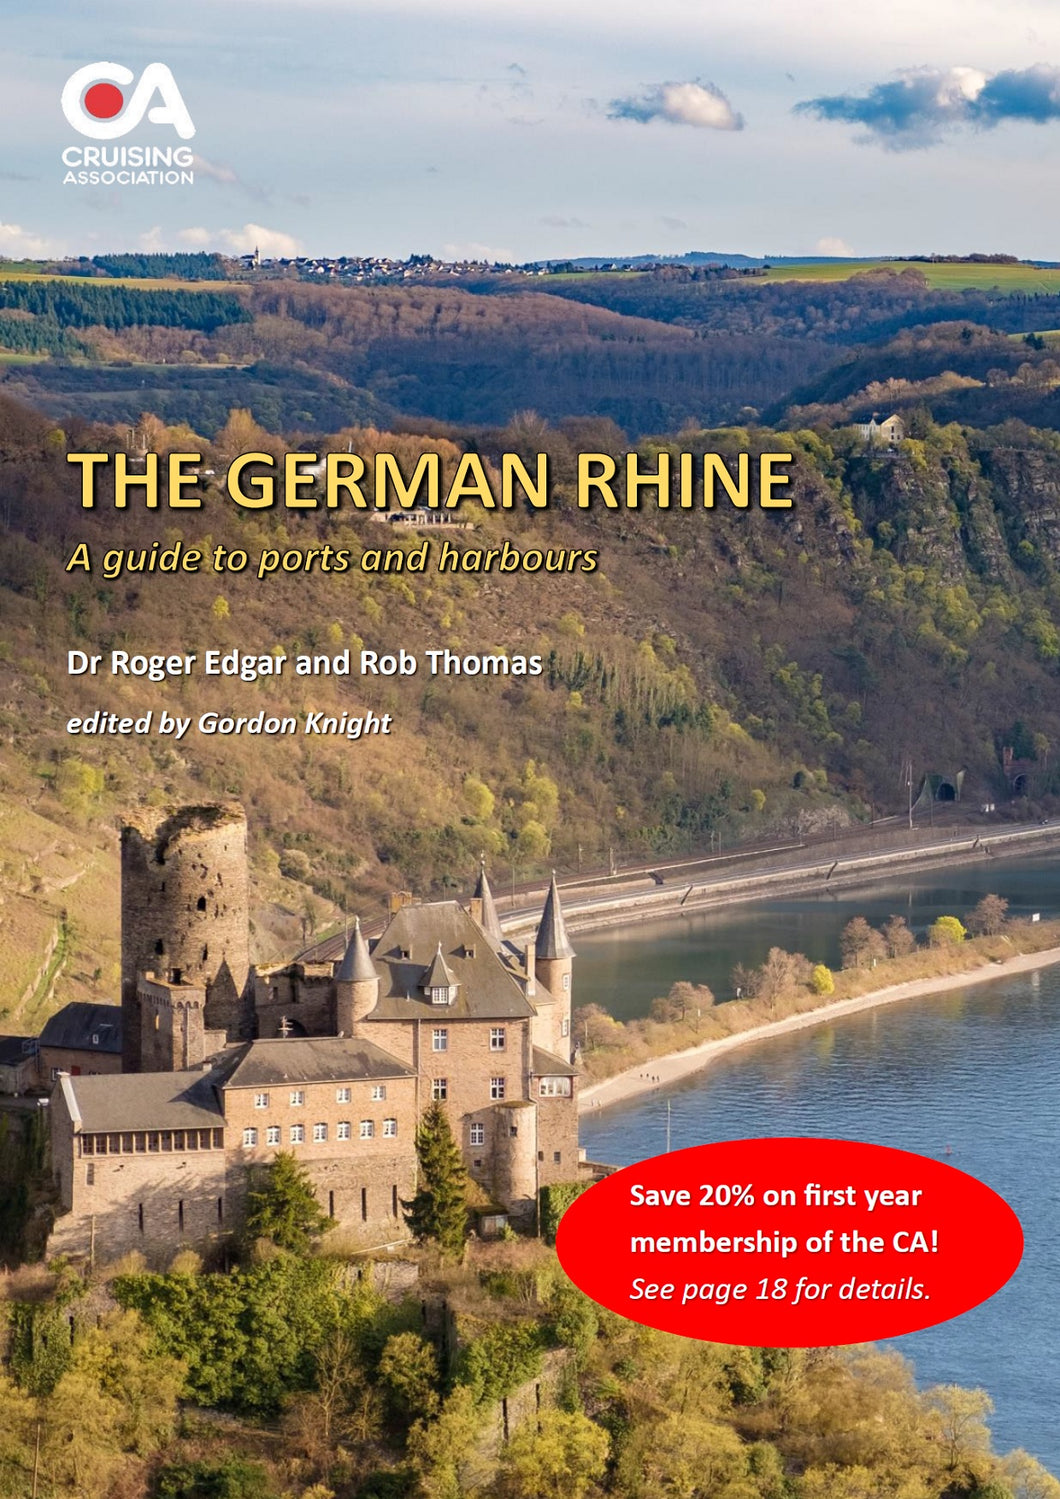 Guide to the German Rhine